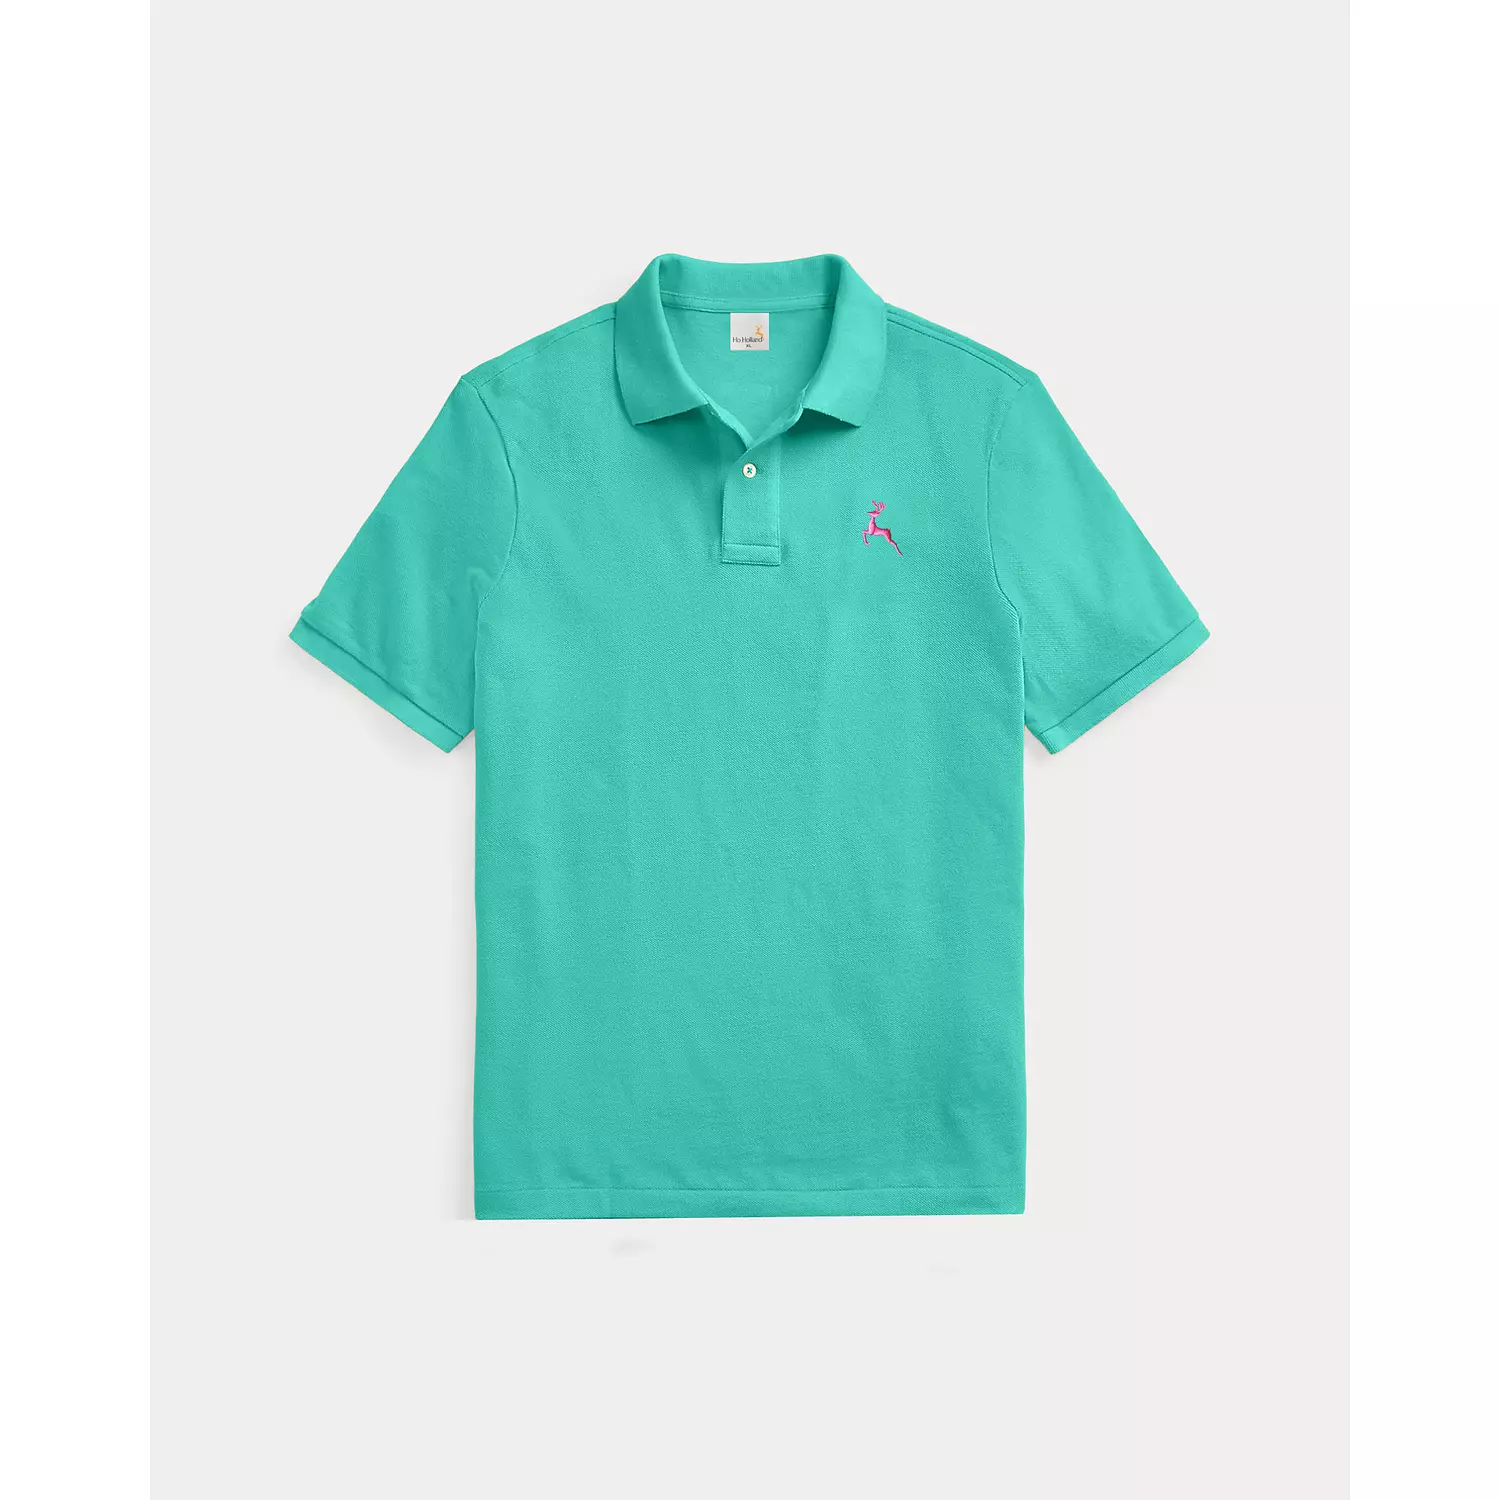 Polo T shirt - Turquoise hover image